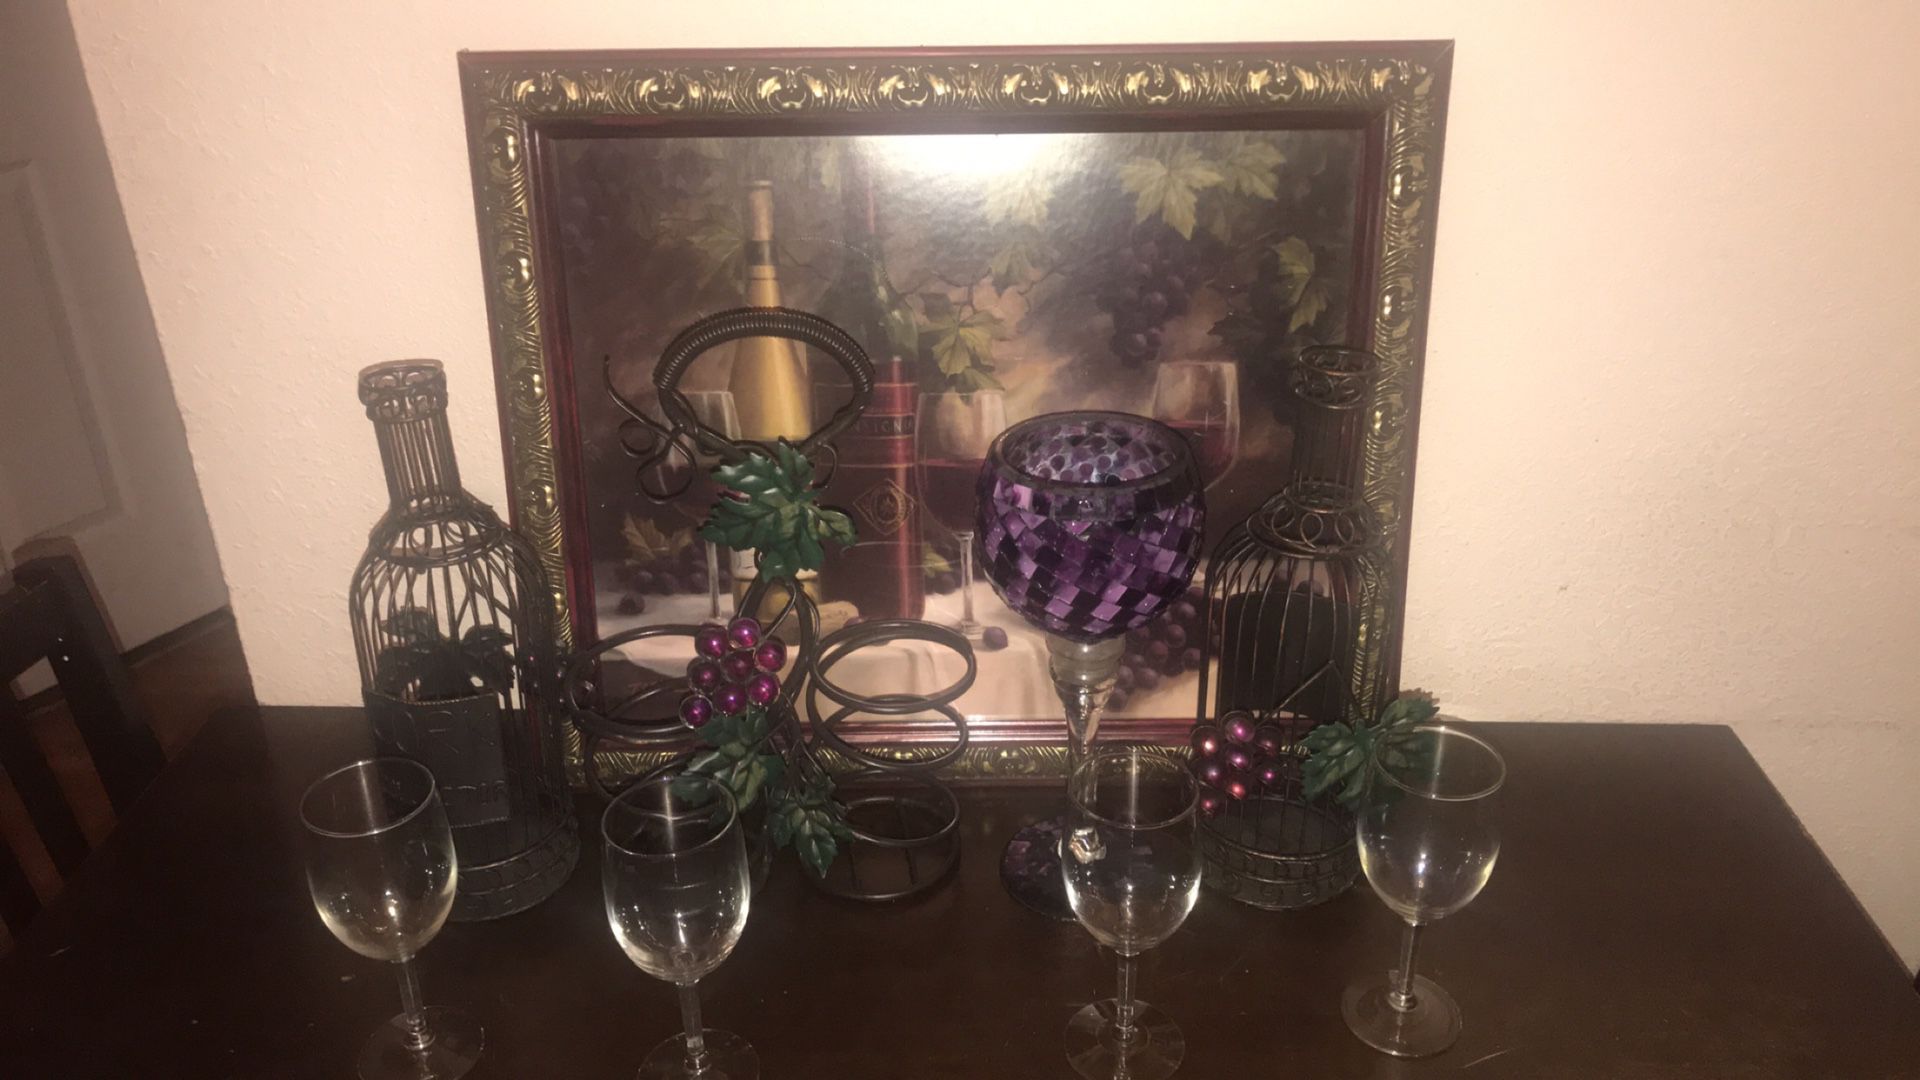 Grapes and wine kitchen decoration. Wall art, corkscrew holders, wine holder, and wine glasses.